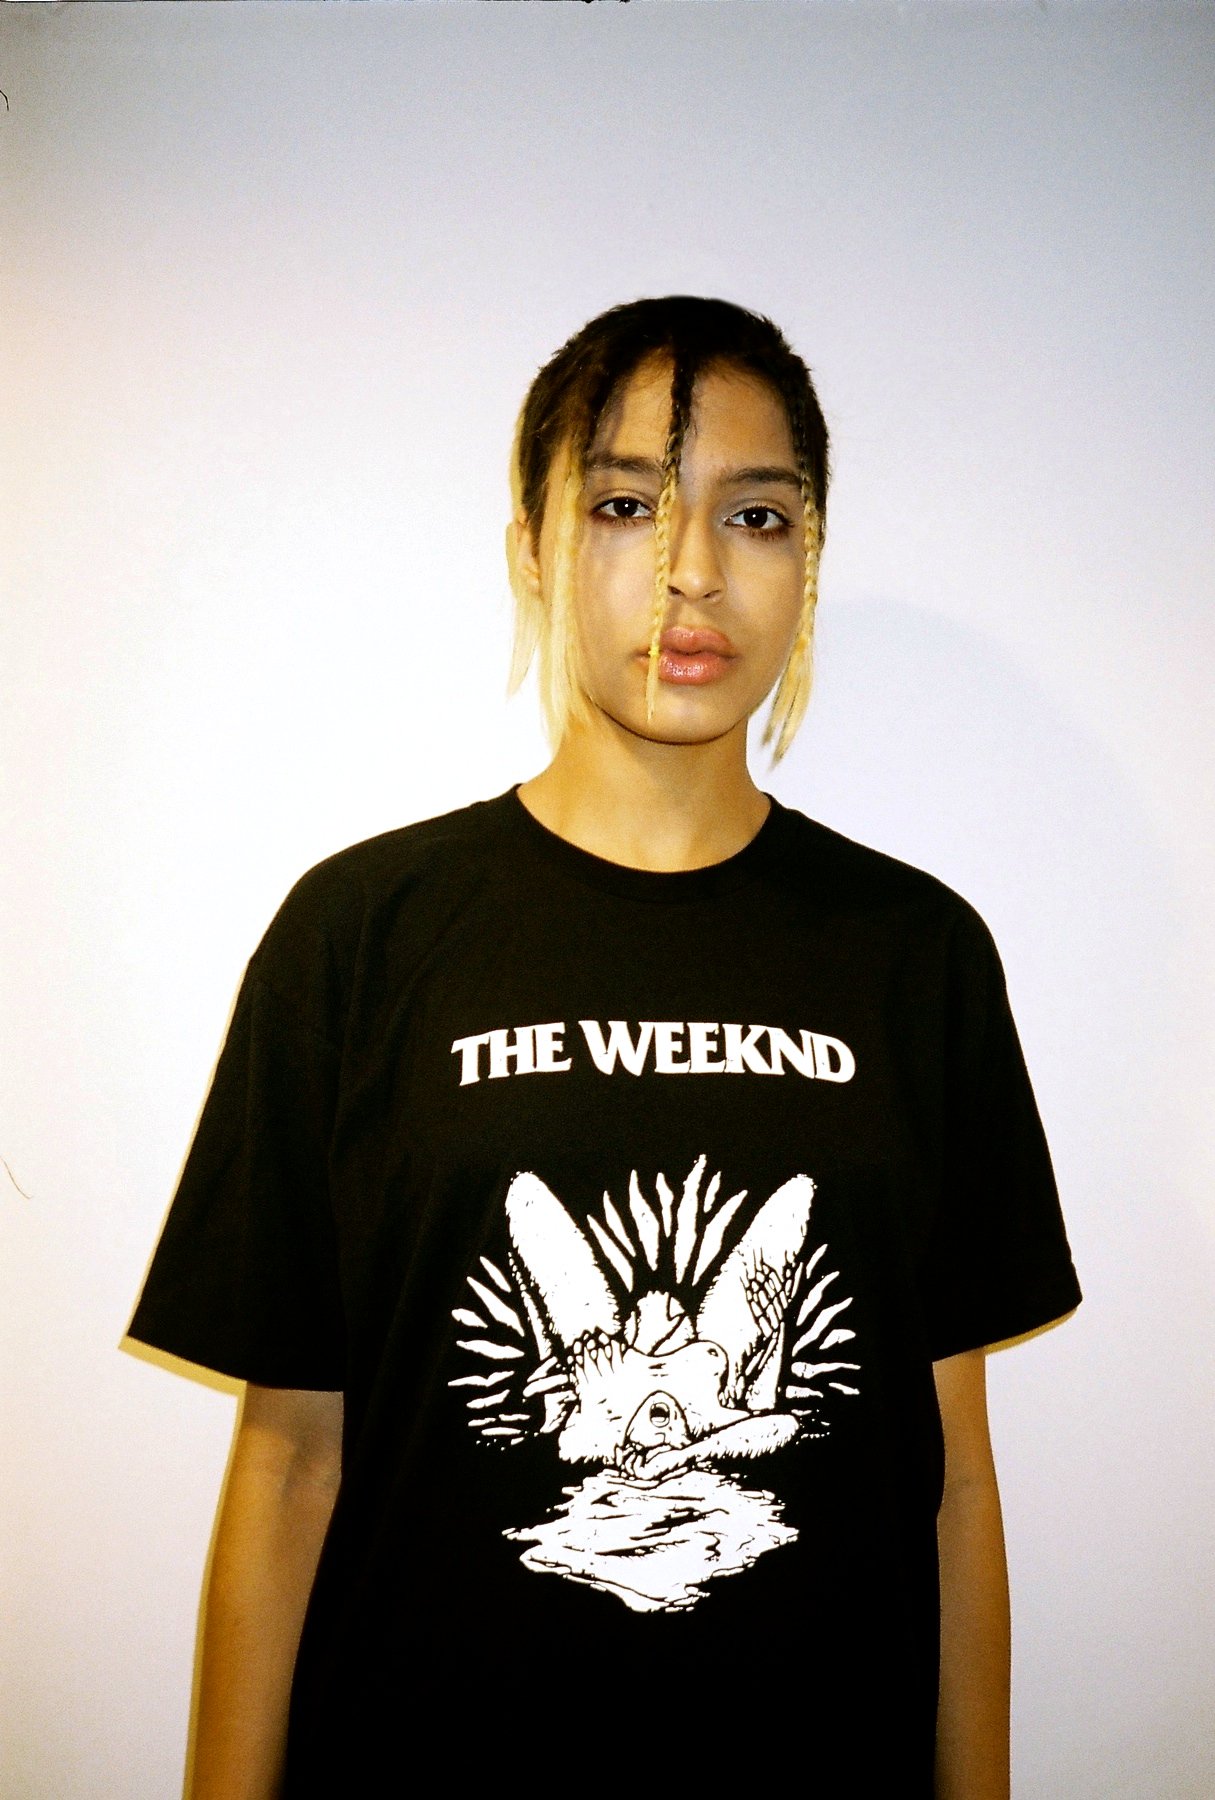 The Weeknd Starboy XO Hoodie, Concert Merch, Tour Clothing, (White